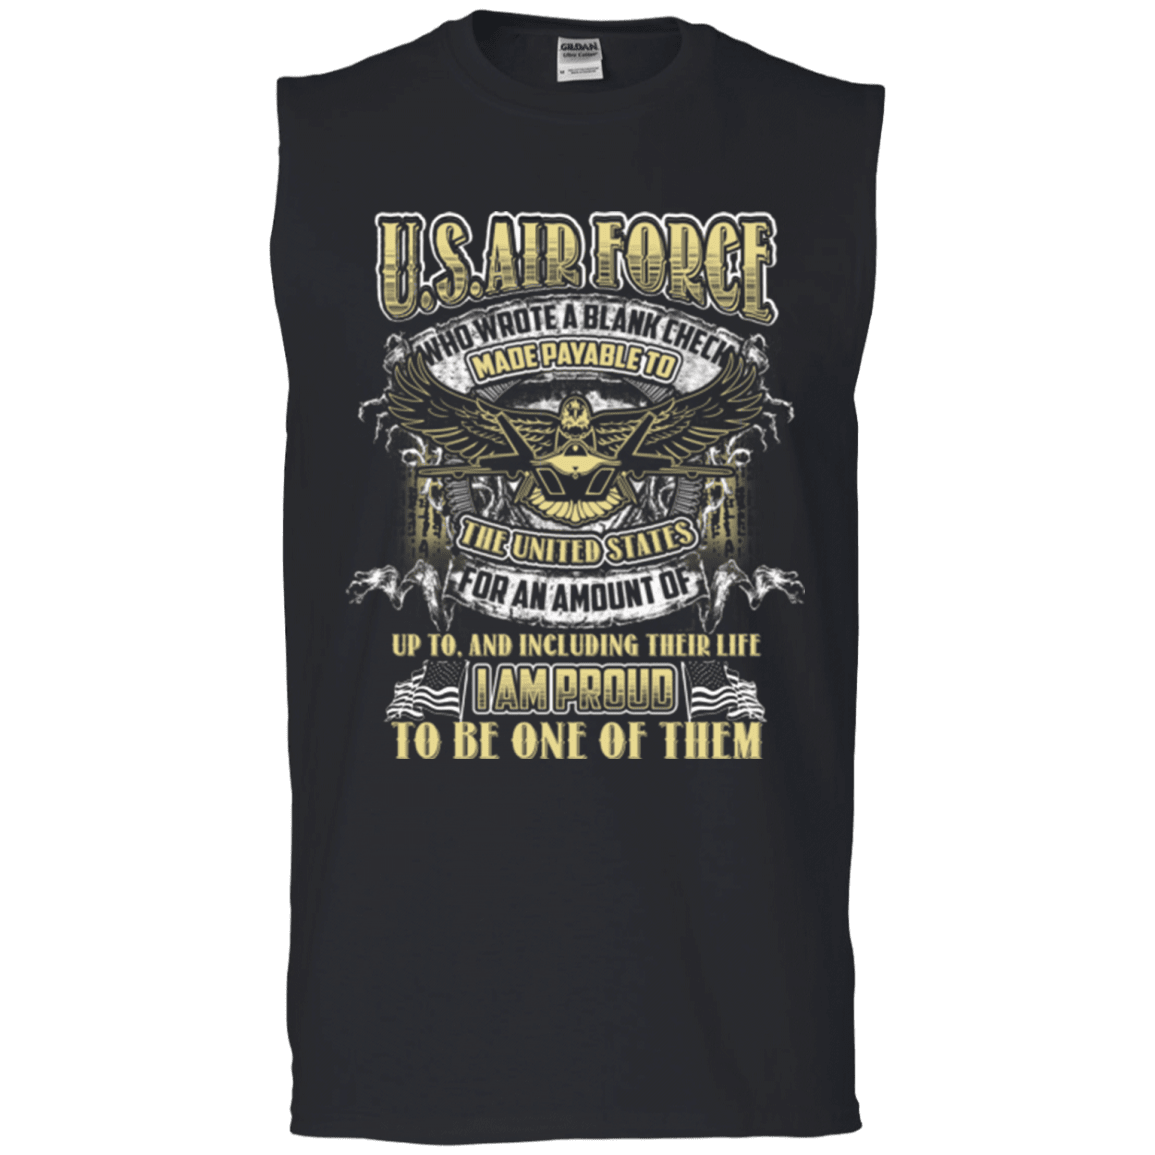 Military T-Shirt "Proud To Be U.S.Air Force"-TShirt-General-Veterans Nation